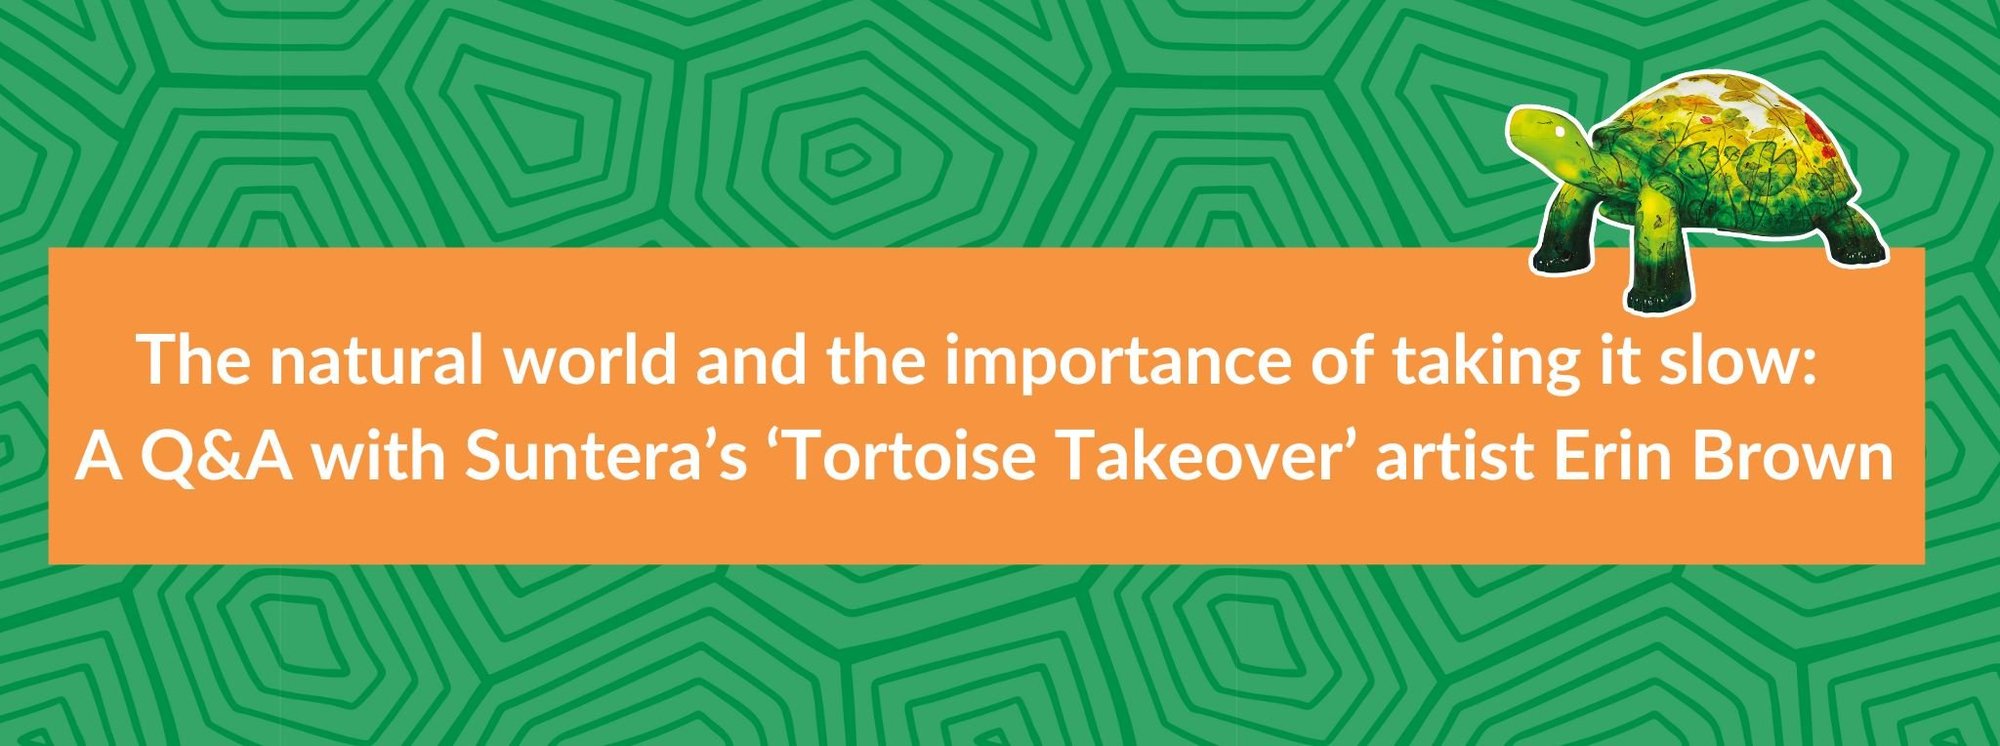 The natural world and the importance of taking it slow A Q&A with Suntera’s ‘Tortoise Takeover’ artist Erin Brown-1